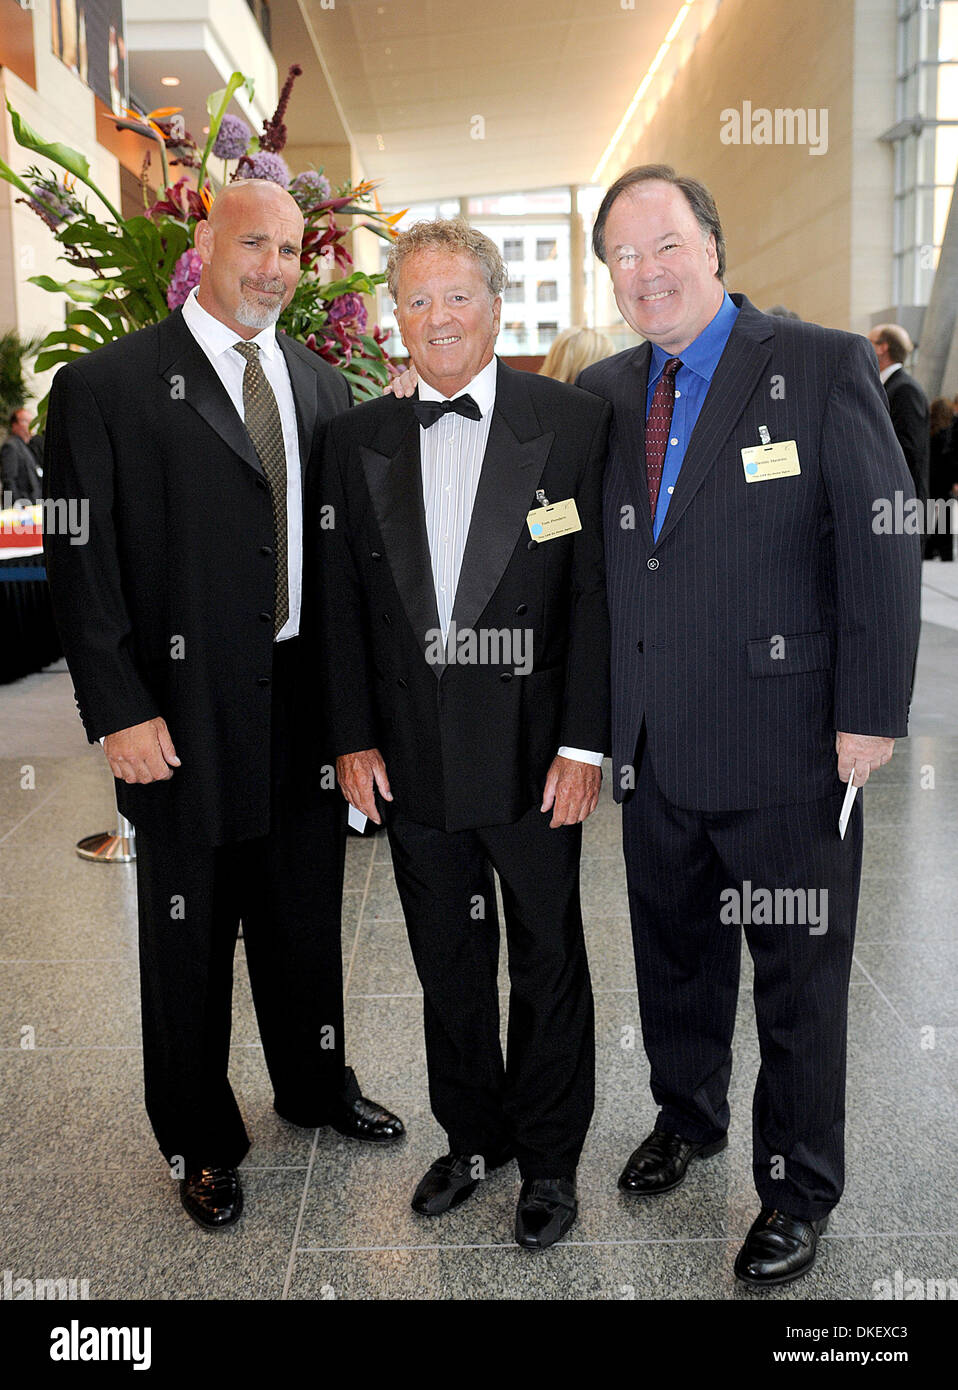 Aug 15, 2009; Raleigh, North Carolina, USA; (L-R) Wrestler BILL GOLDBERG, Univerity of Houston CoachTOM PENDERS and Actor DENNIS HASKINS arrive at the Jimmy V Gala to help kick off the Celebrity Golf Classic.  The Black Tie Gala took place at the Raleigh Convention Center. The Jimmy Valvano Foundation has raised over 12 million dollars to help benefit cancer research. Coach Jim Val Stock Photo